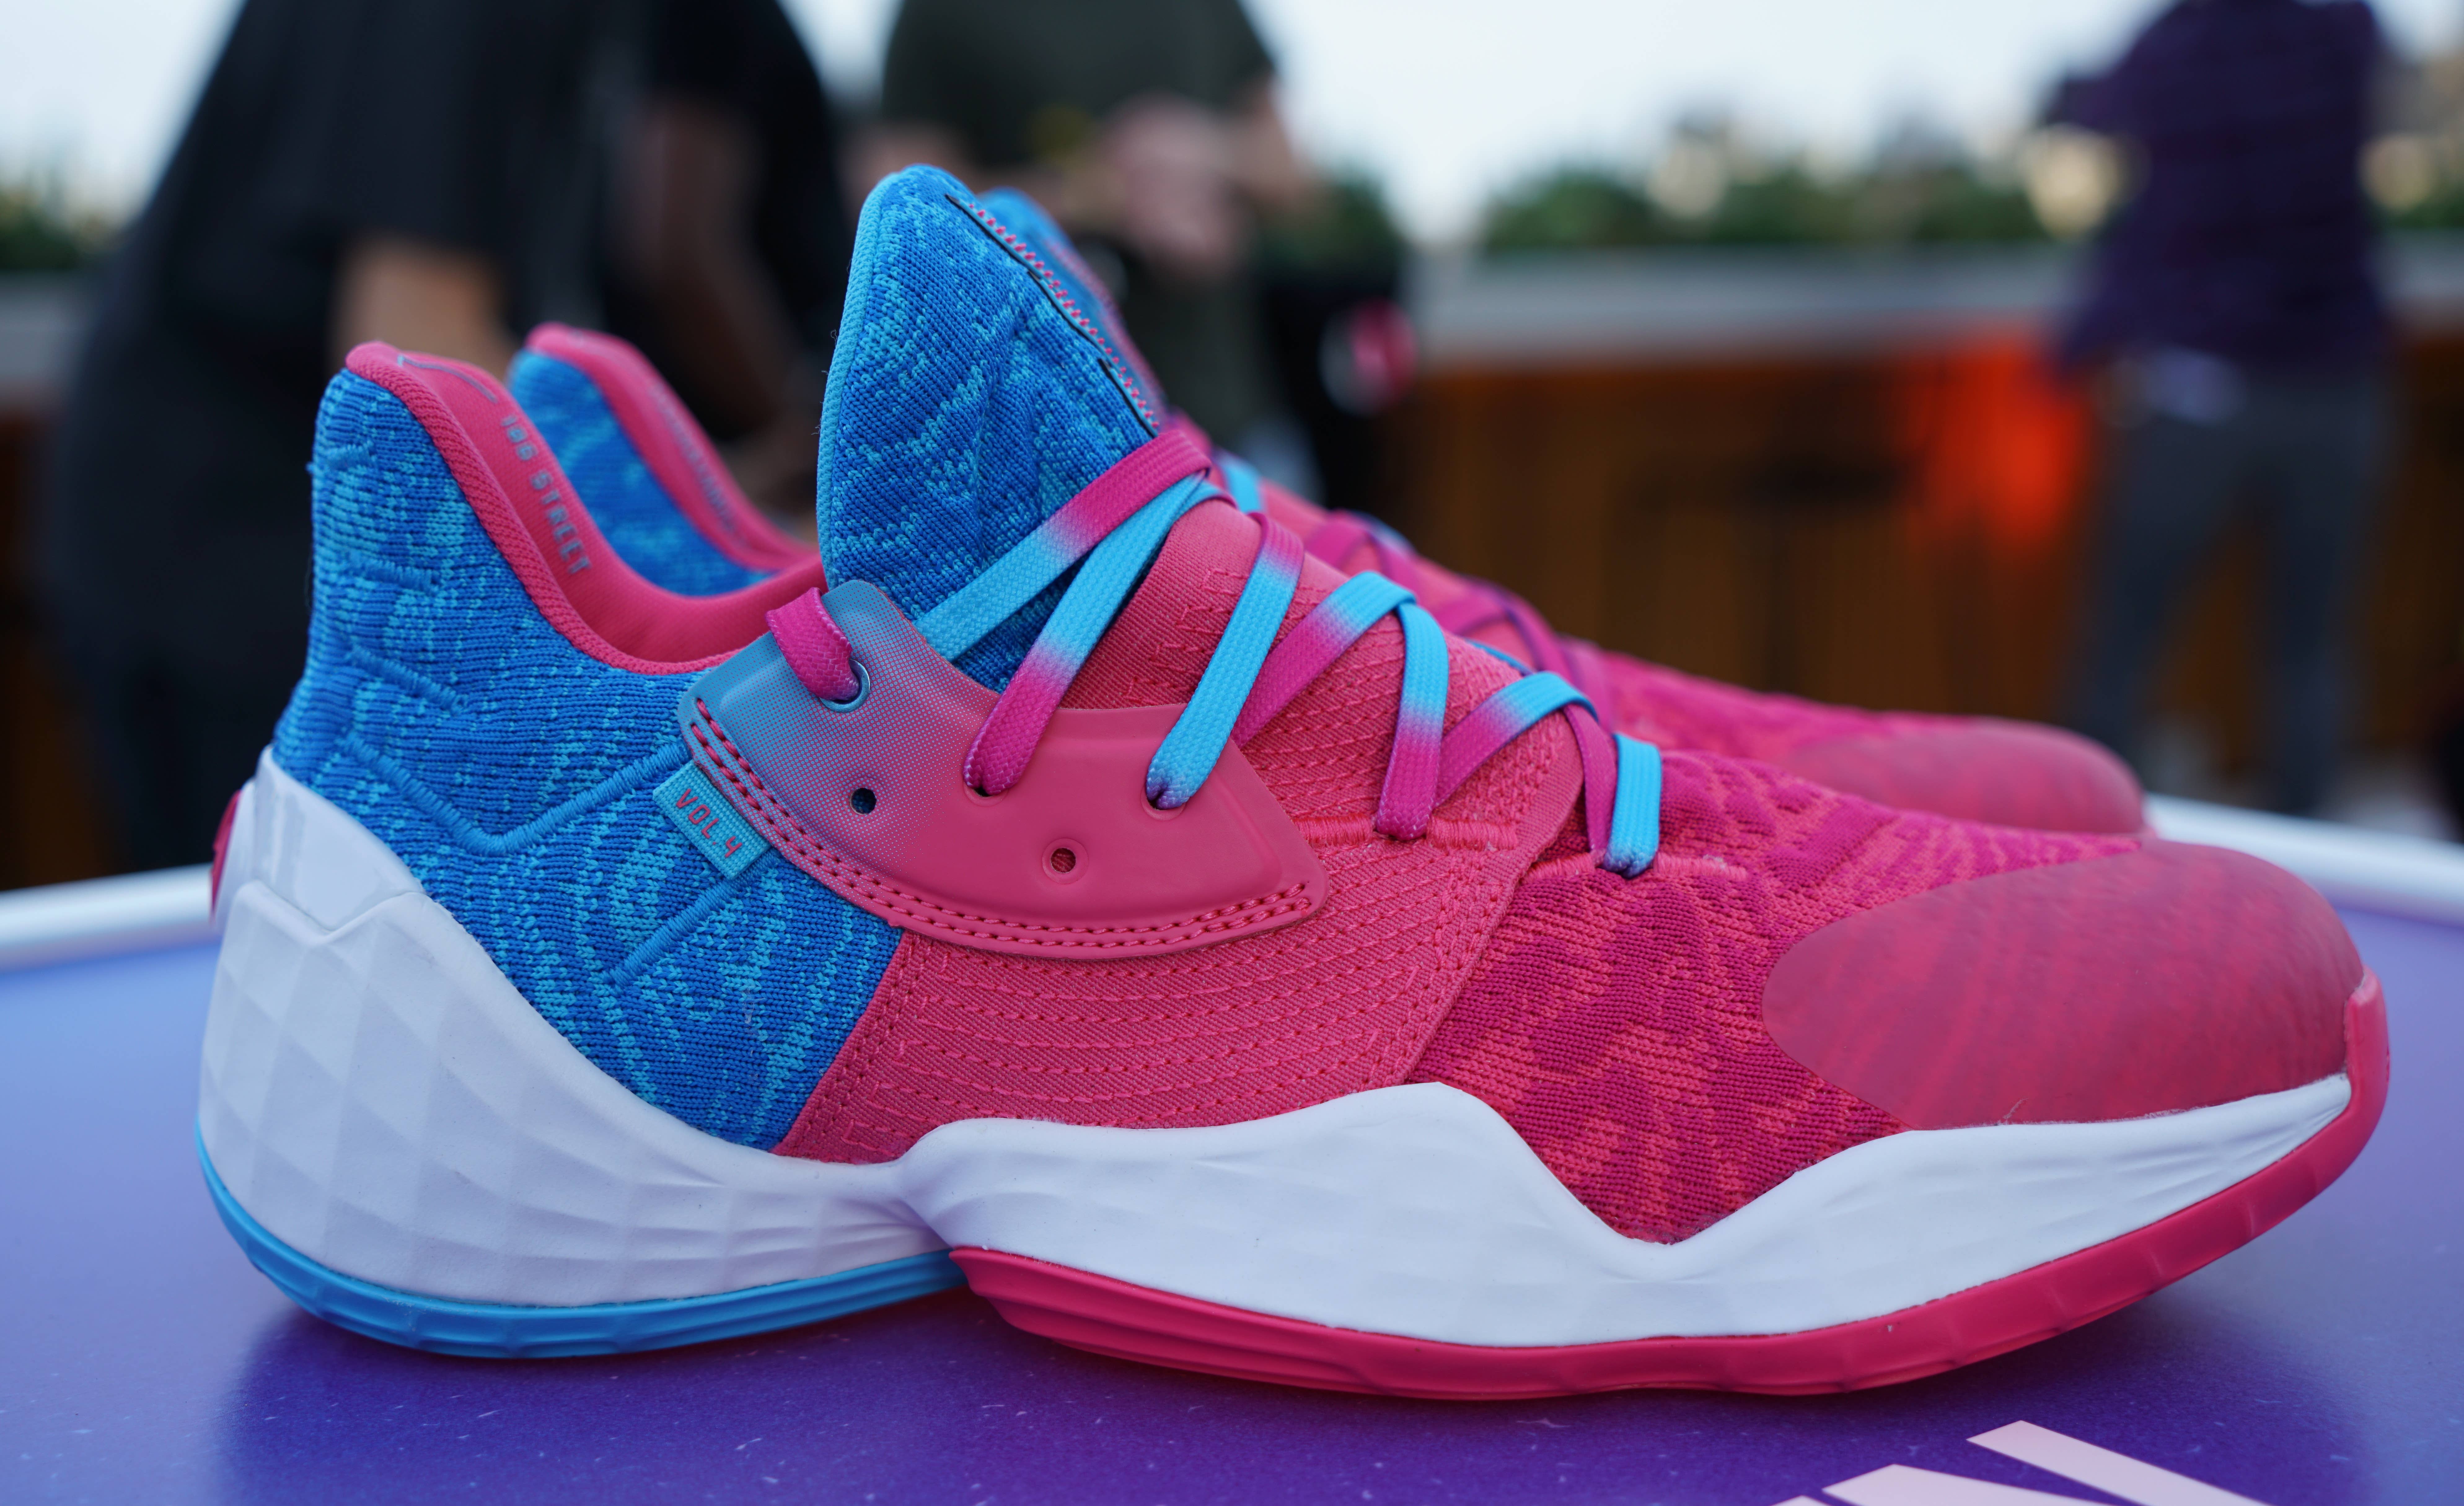 Adidas Harden Vol. 4 'Candy Paint'